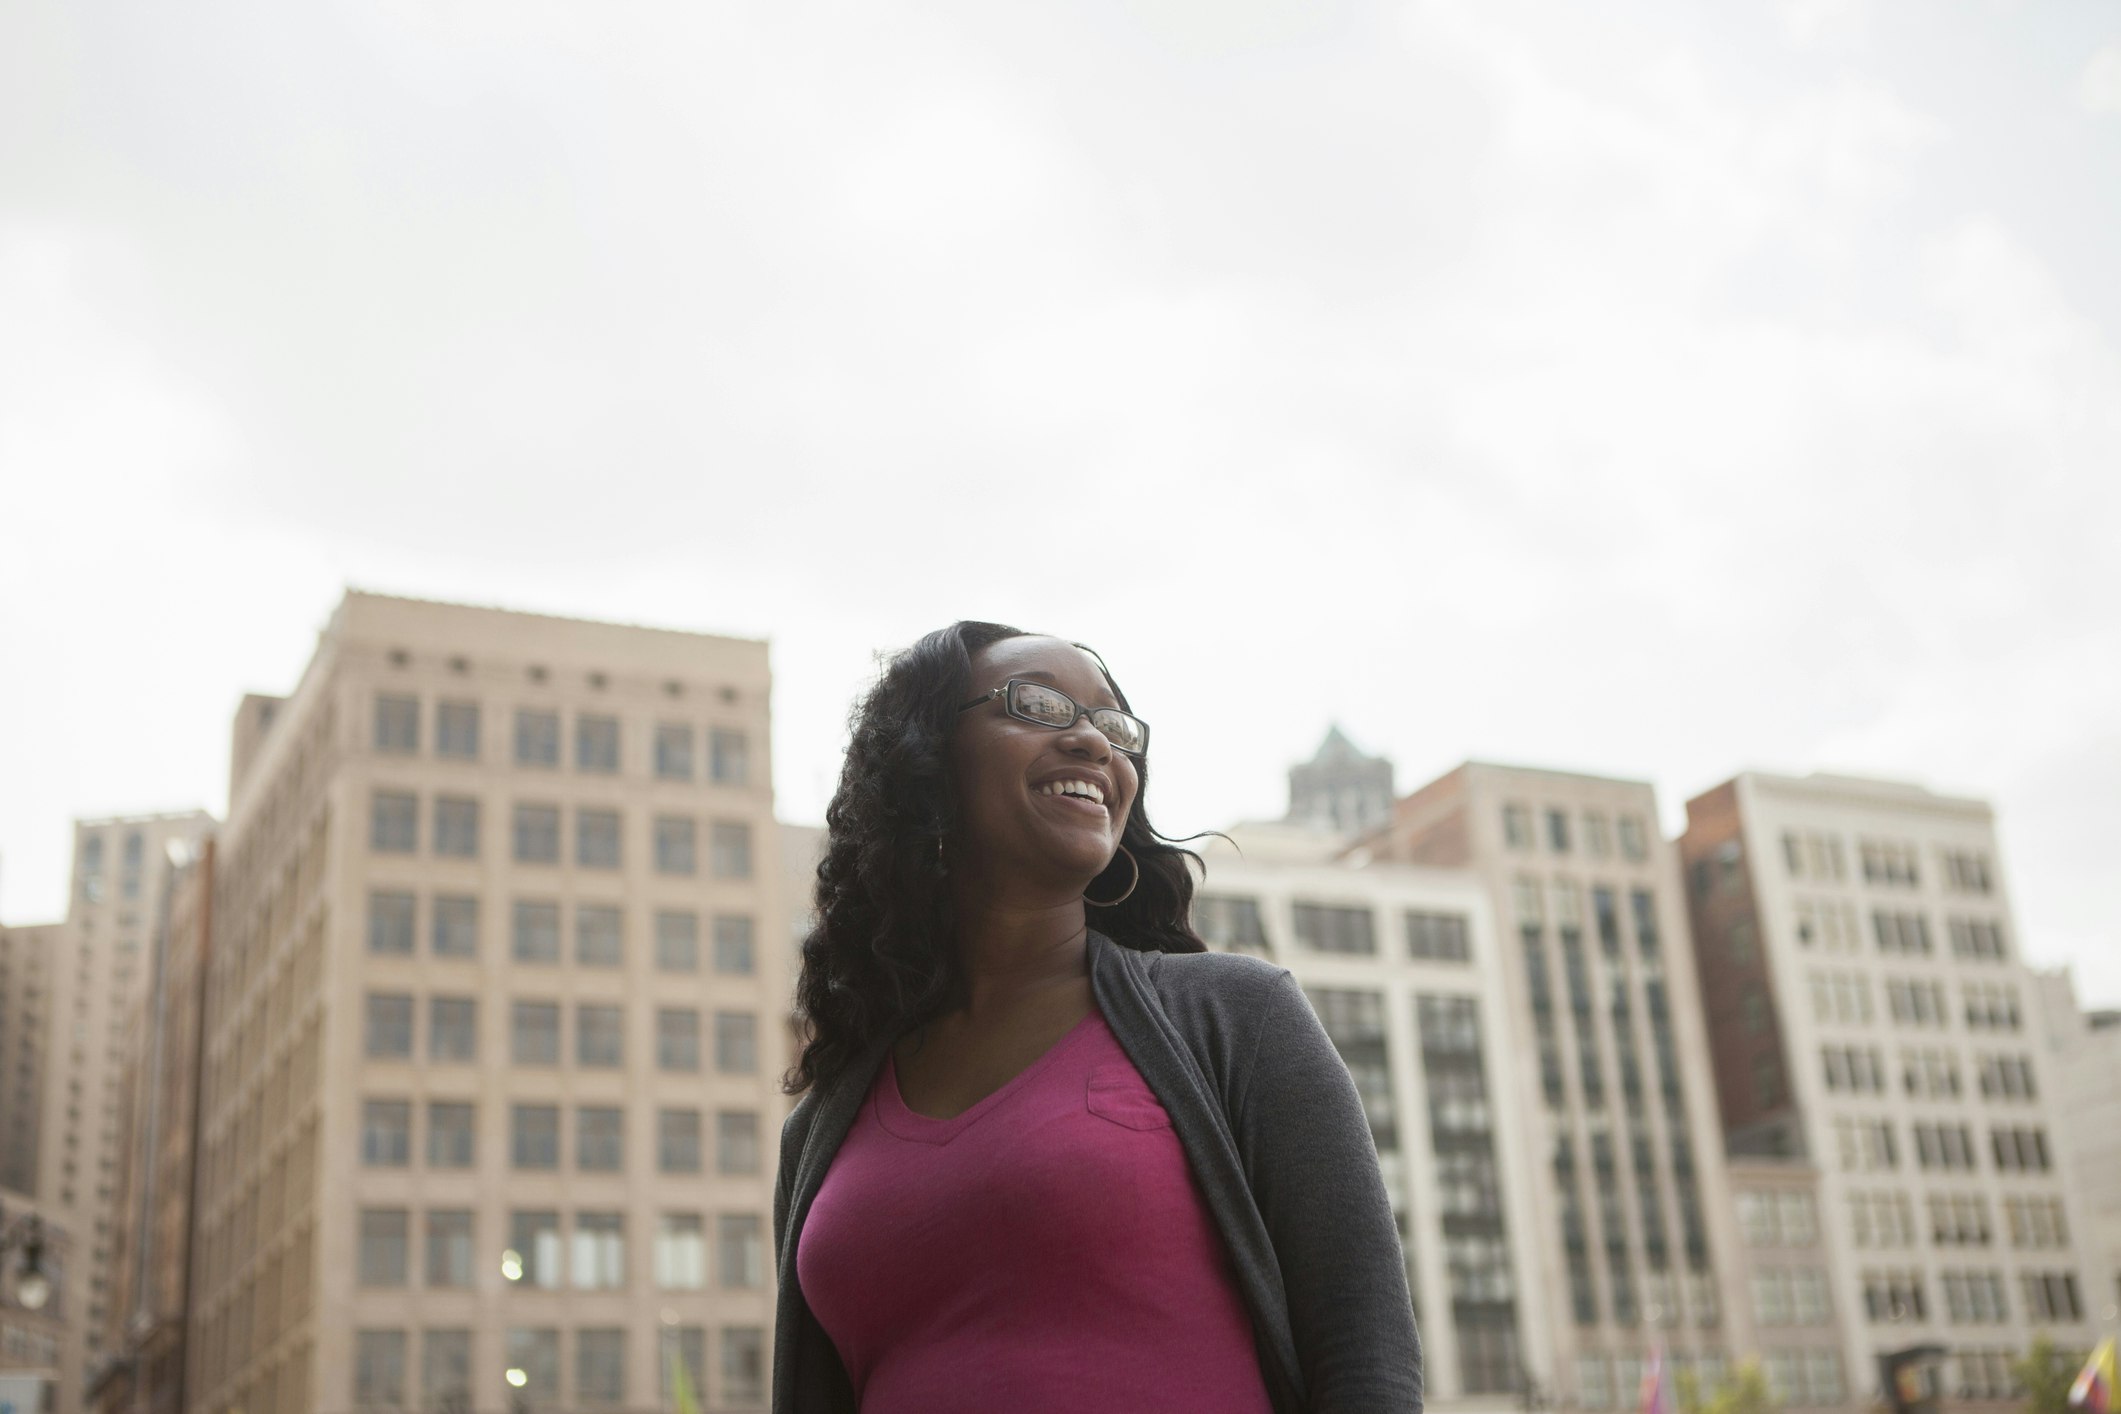 Low-angle portrait of a smiling woman with Detroit high-rises in the background